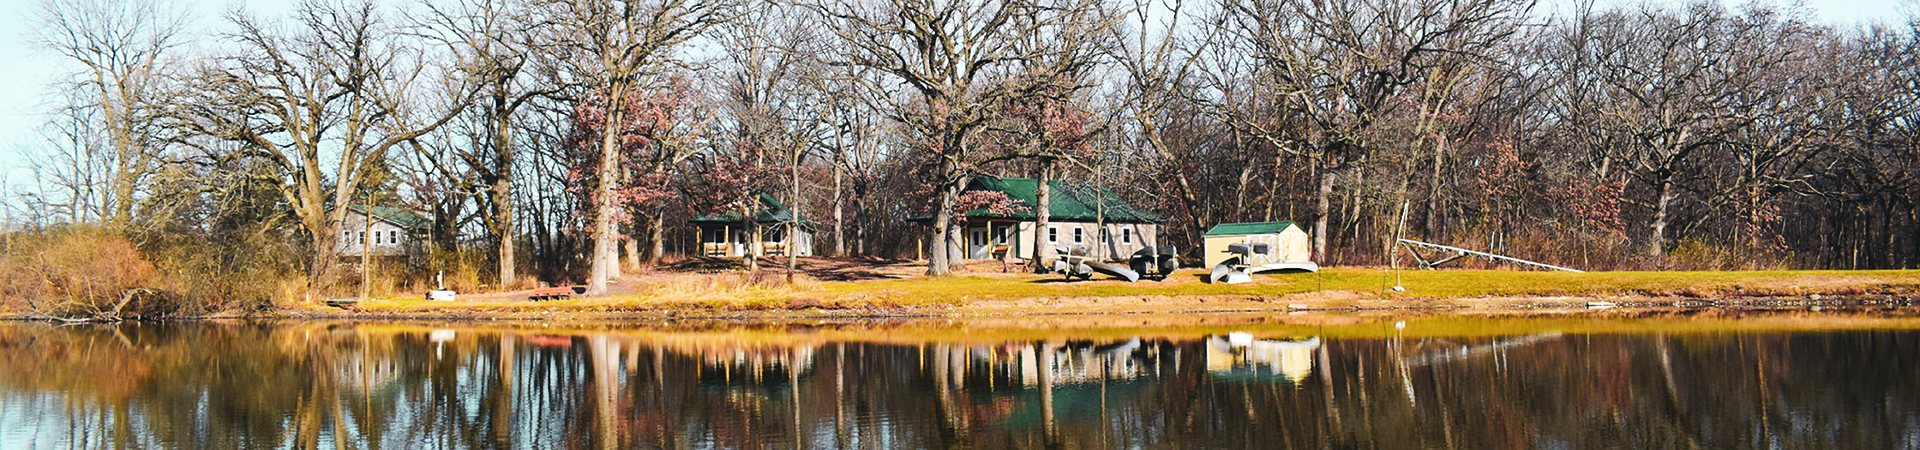  cabins at camp dean across the pond 